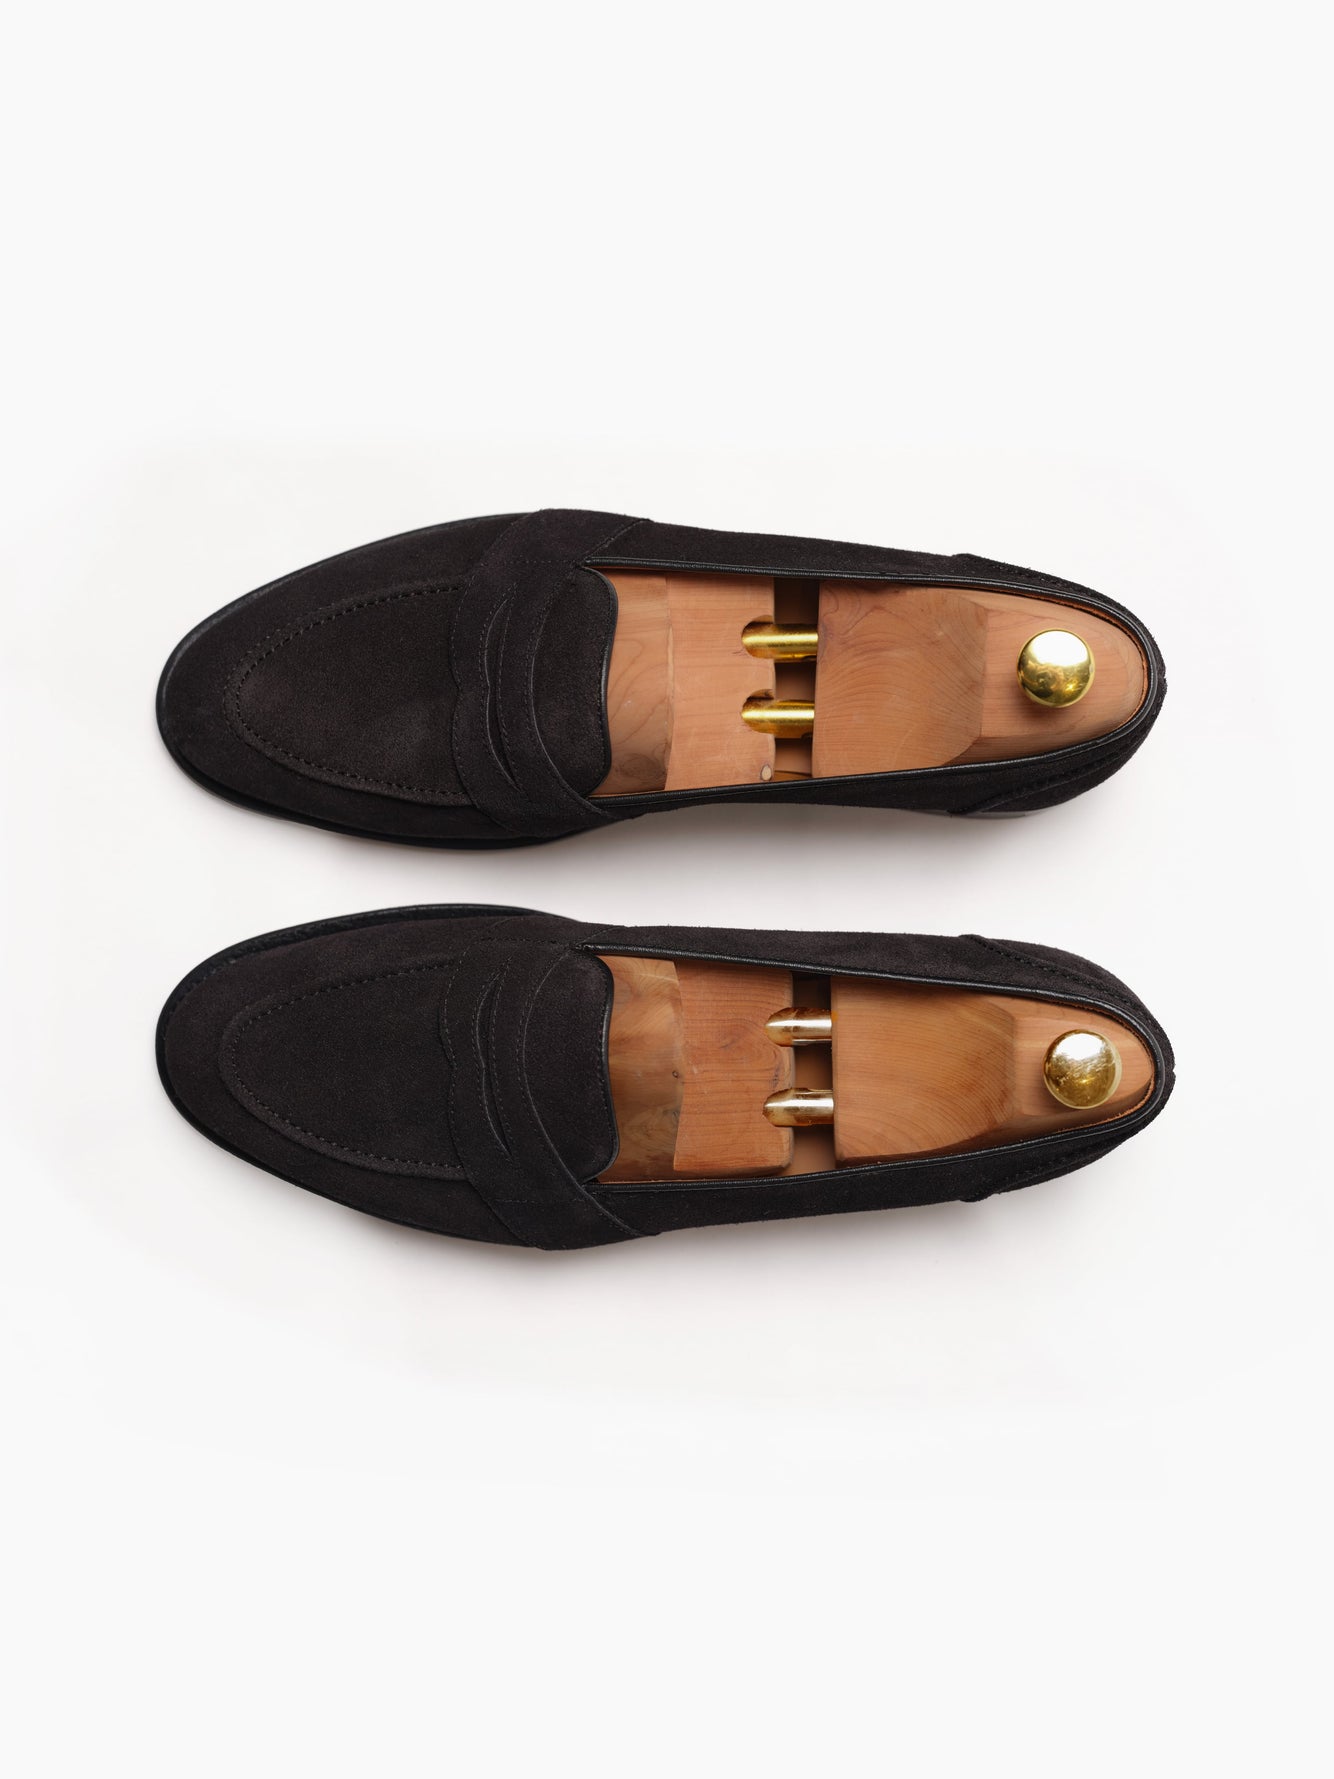 Penny Loafers Black Suede - Grand Le Mar